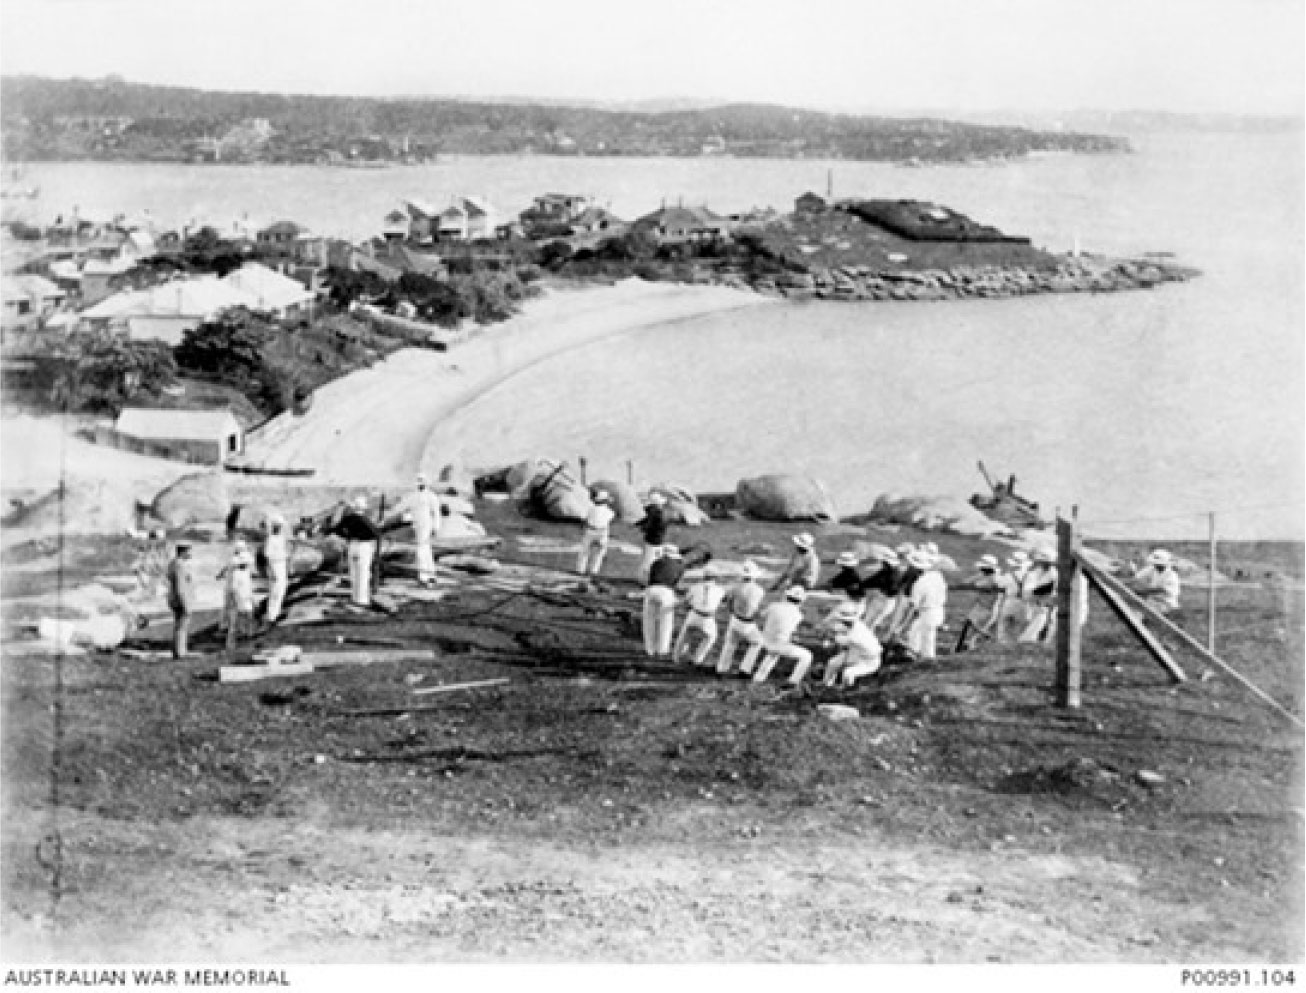 1910. Members of the Short Course (1910-04-24 to 1910-07-23) at the South Head Commonwealth Gunnery School using brute strength to move a 6 inch, Mark 5 gun barrel on a slope. Green Point is in the background. (Donor Royal Australian Artillery Historical Society)